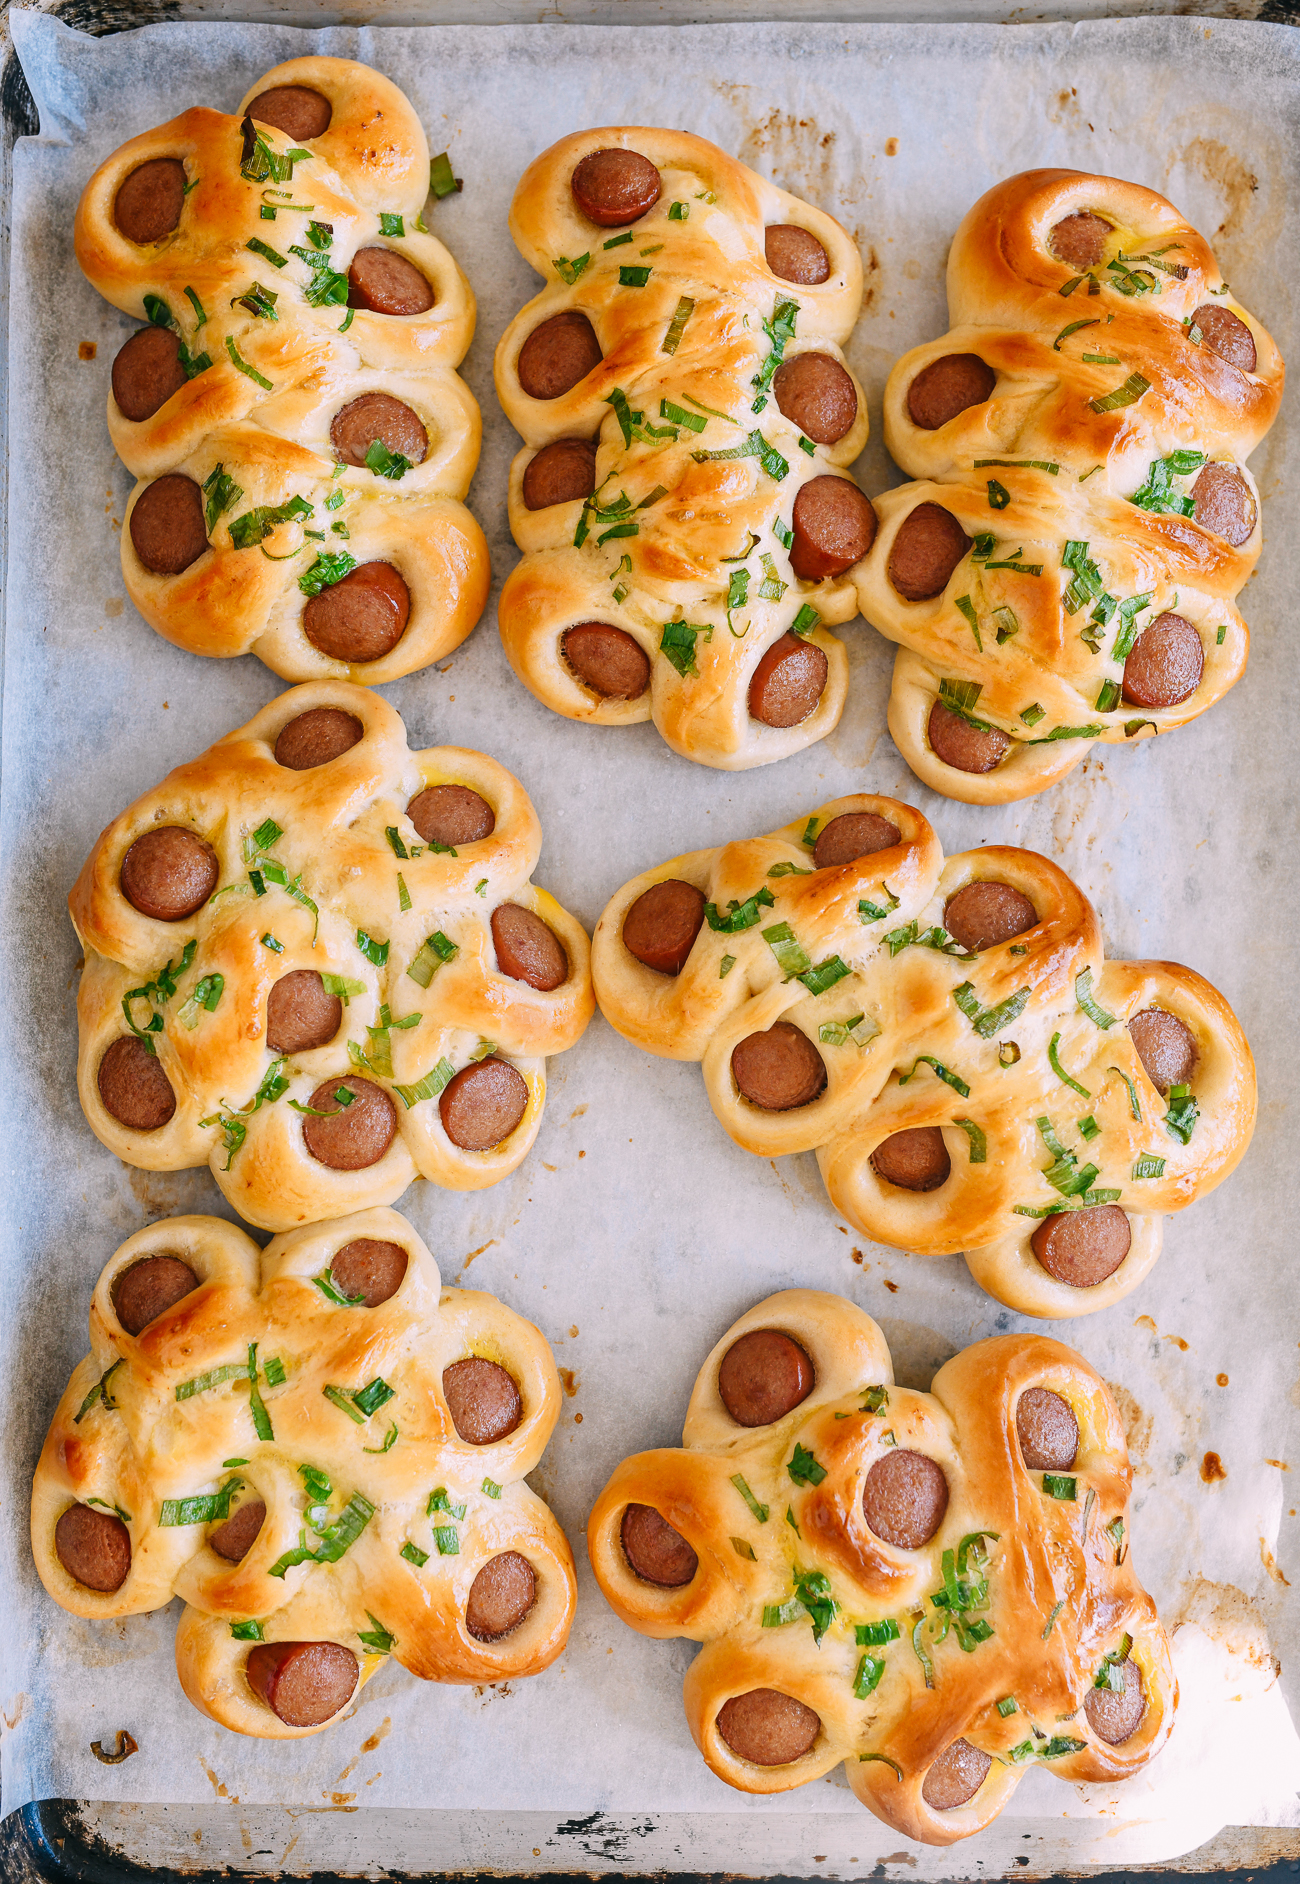 Flower Hot Dog Buns out of the oven